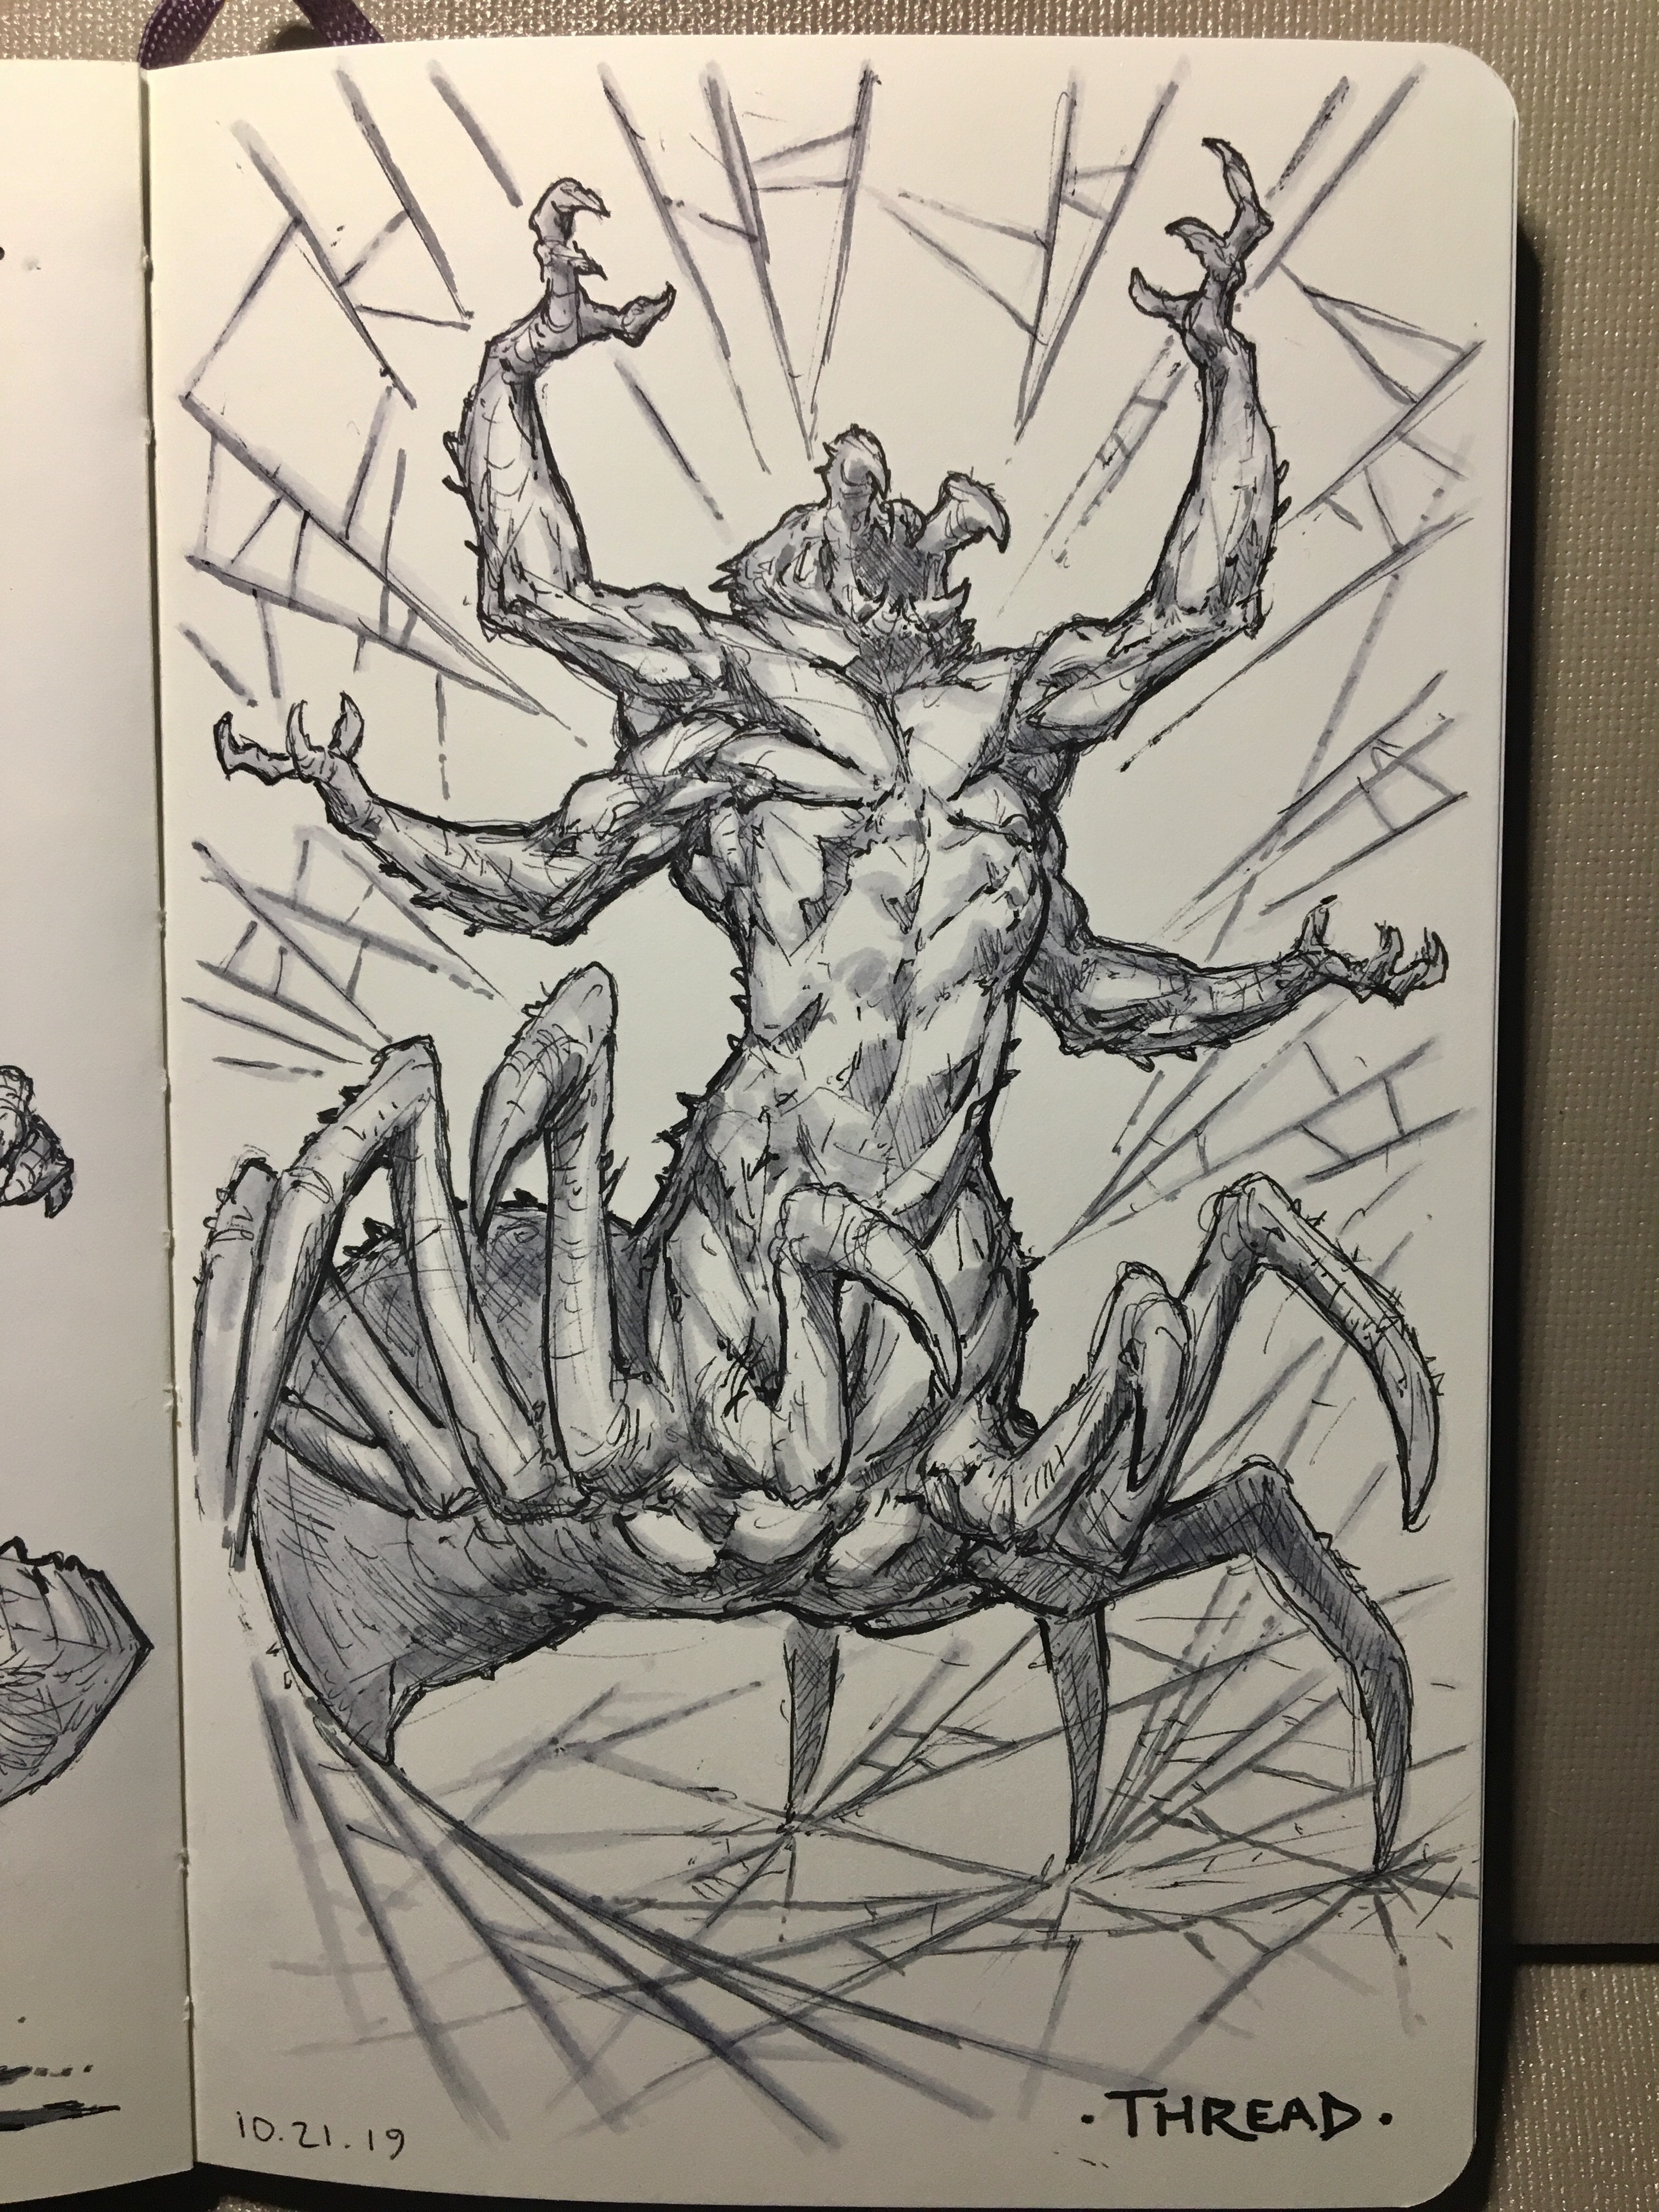 Day 20 of inktober 2019! Thread! Looks like the itsy bitsy Spider’s been working out 🕷💪 Haha, well at least the four arms have a bit of context this round! 😂👍